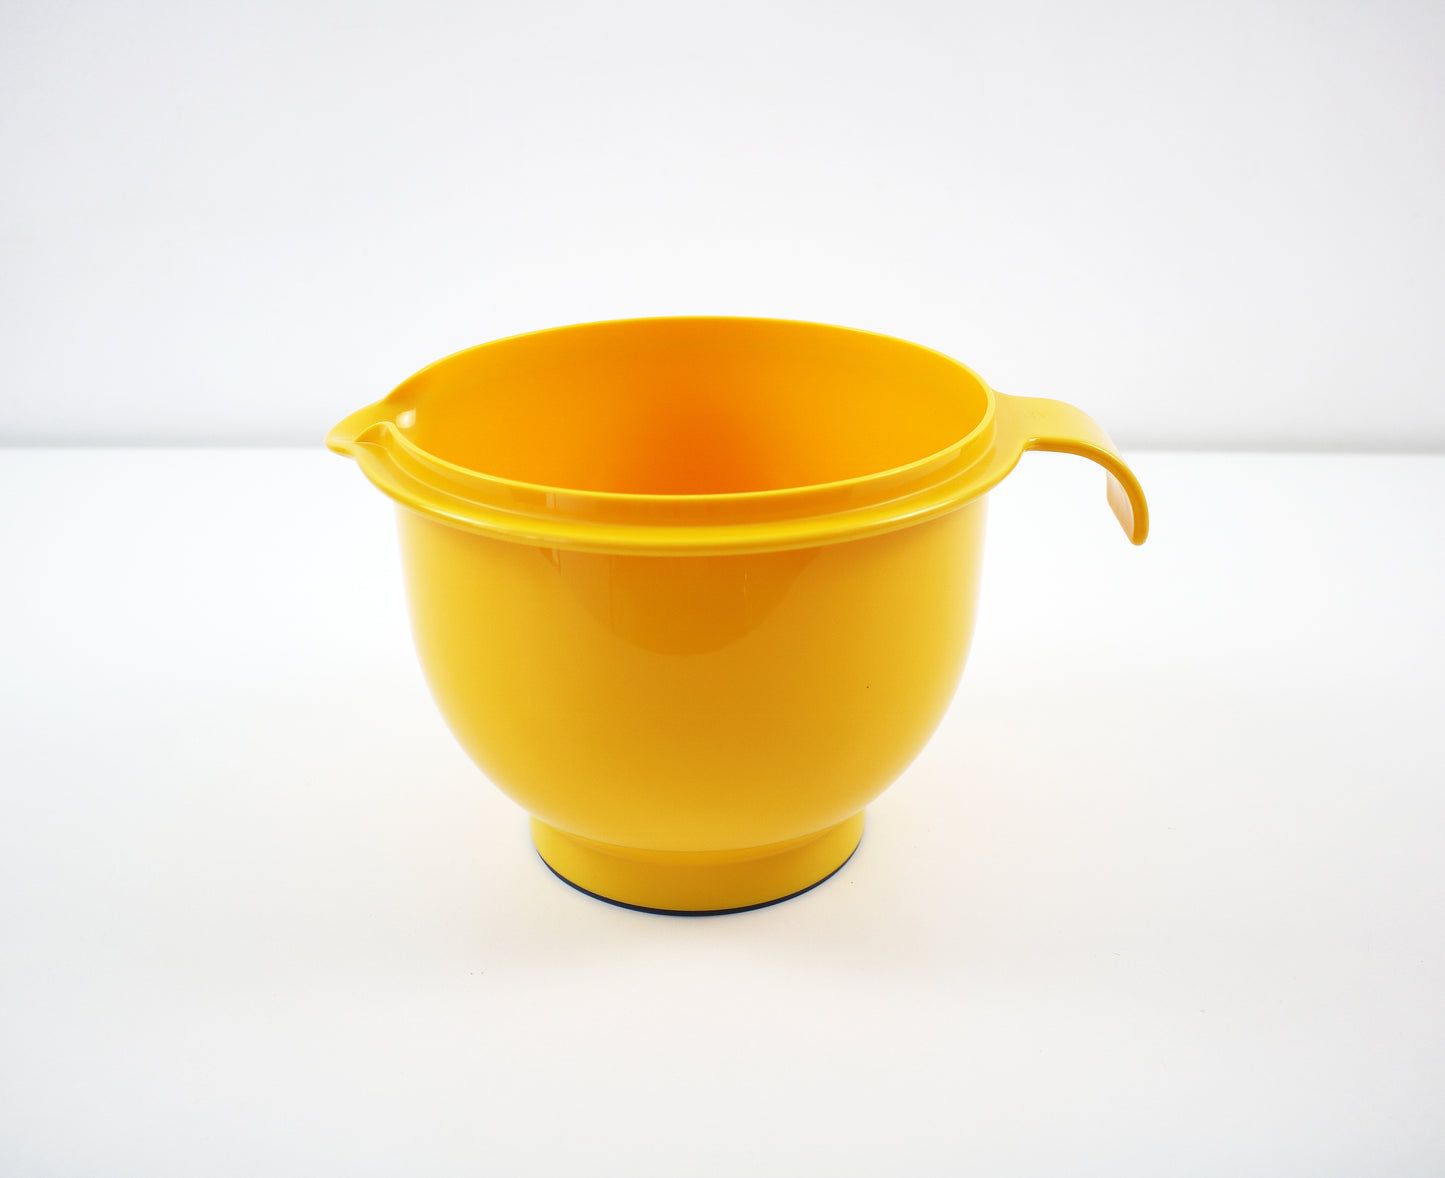 1980s Chef Line yellow mixing bowl by Bruno Gecchelin for Guzzini Italy